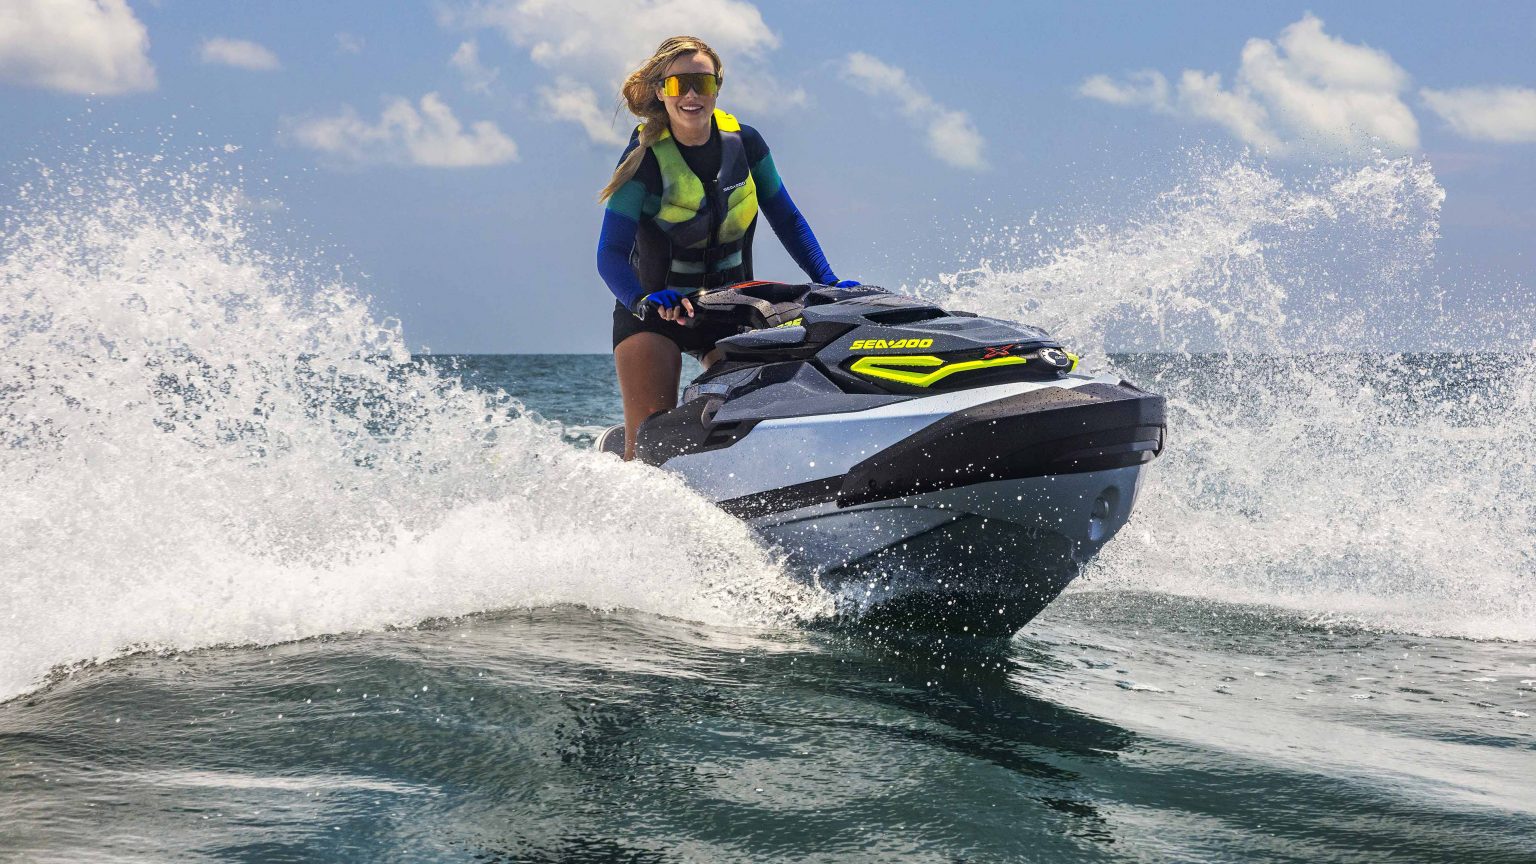 2024 SeaDoo prices and model changes